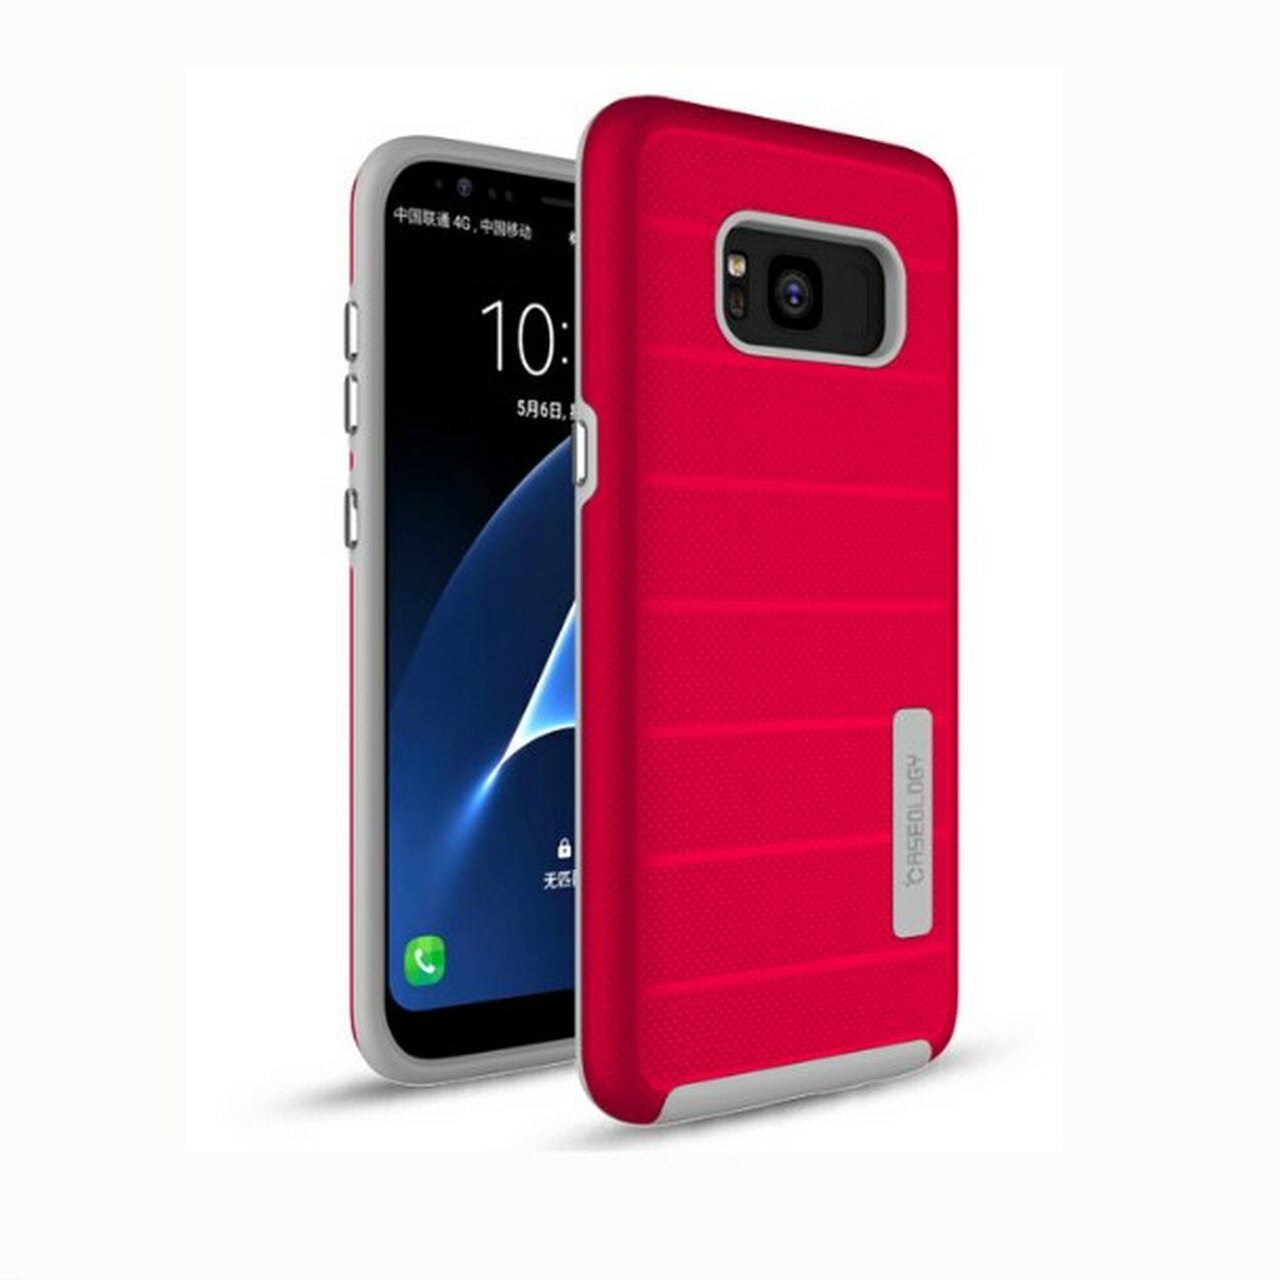 Caseology Hard Shell Fashion Case for Samsung Series  S  - S8 / S8+ / S9 / S9+ / S10 / S10+